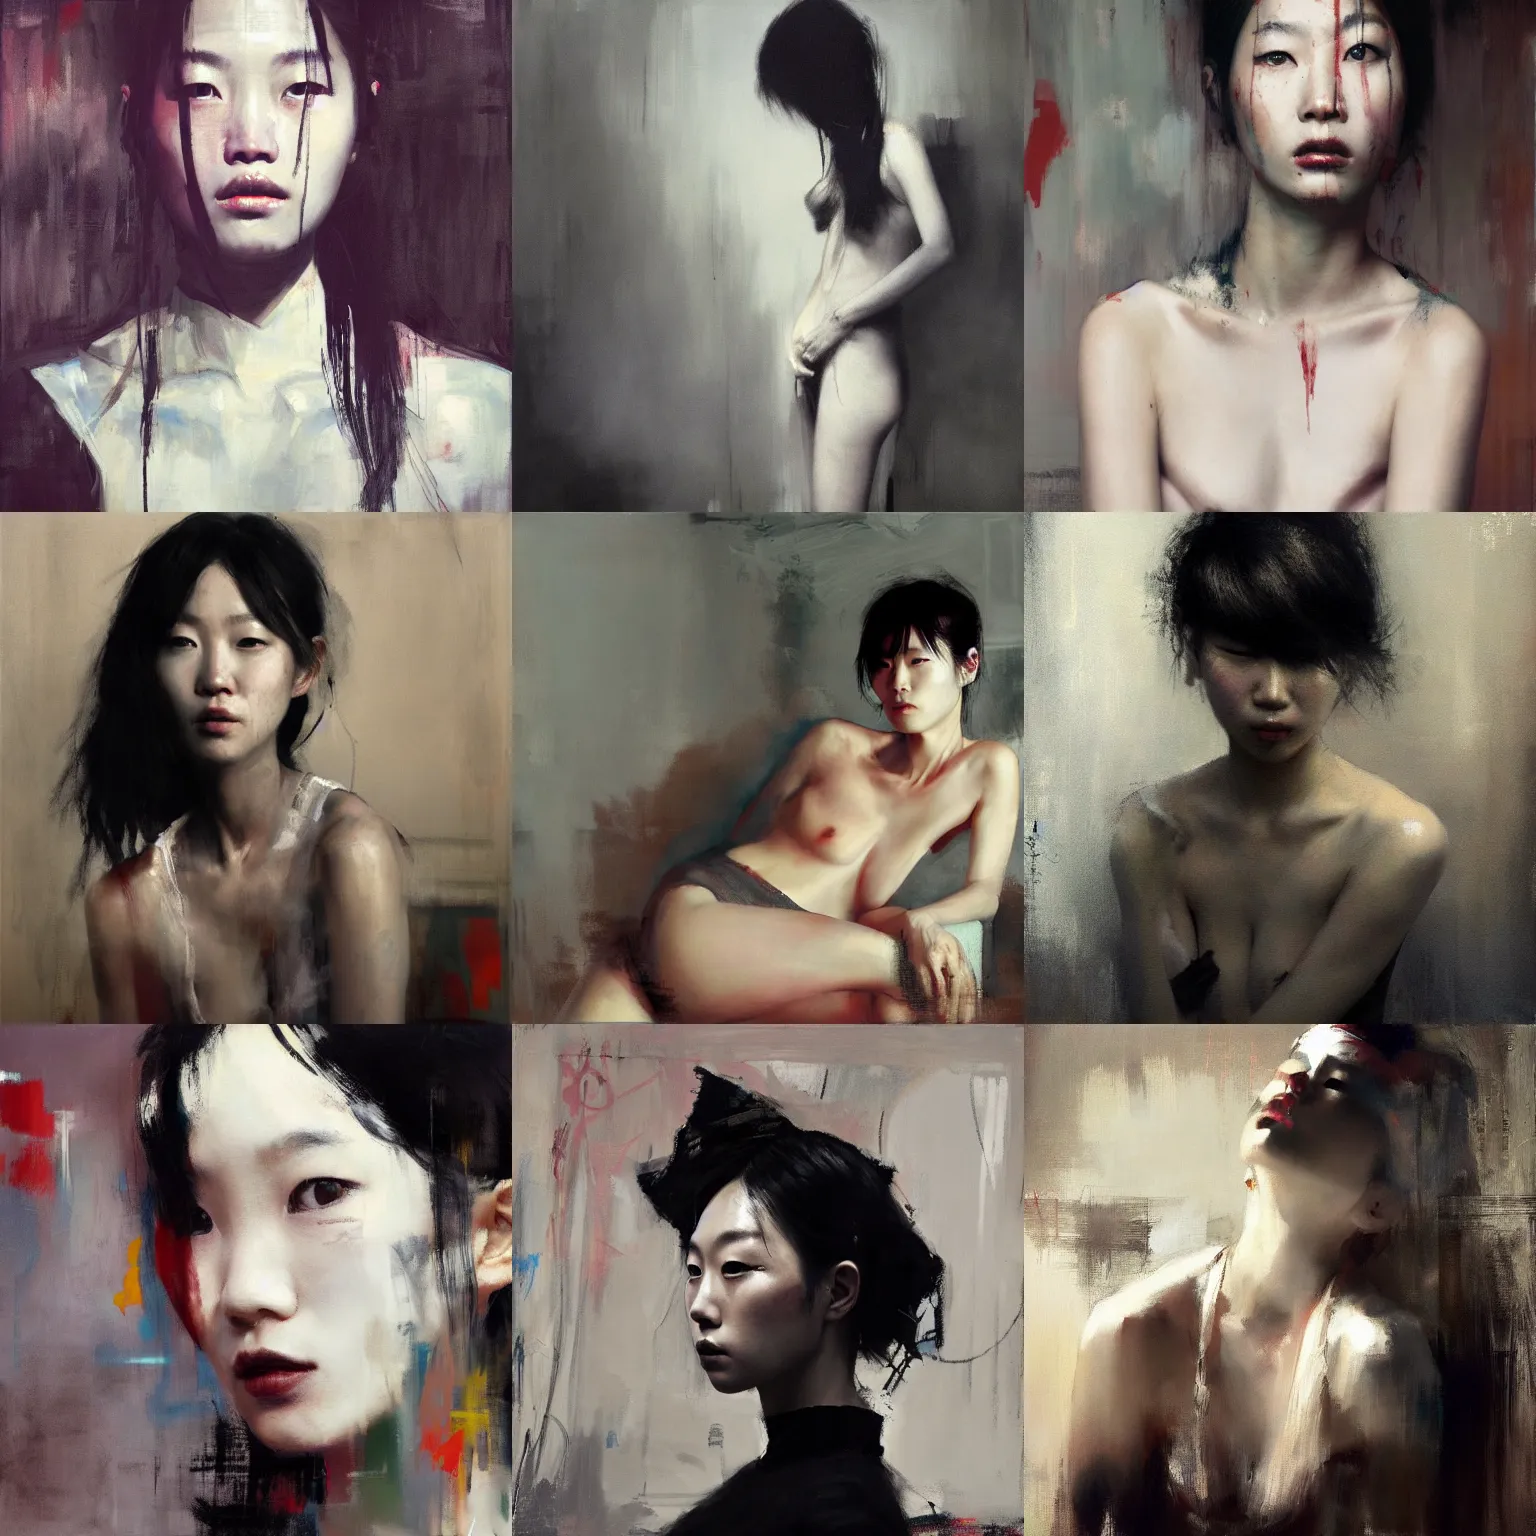 Prompt: lee jin - eun by jeremy mann, francoise nelly, basquiat, rule of thirds, seductive look, beautiful